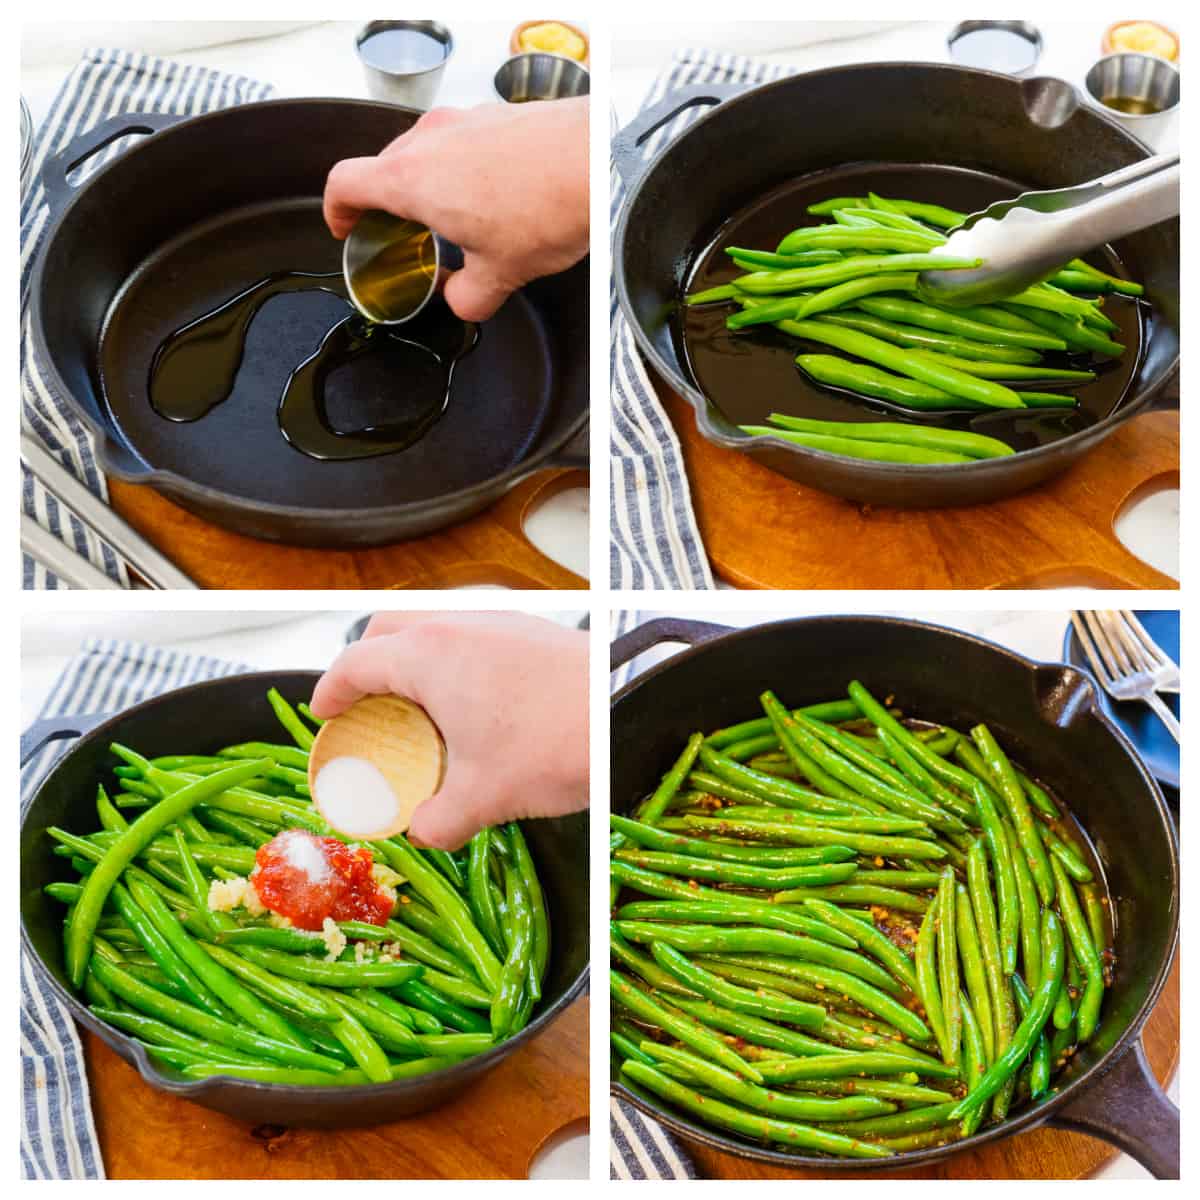 Collage showing how to make low carb Szechuan green beans.